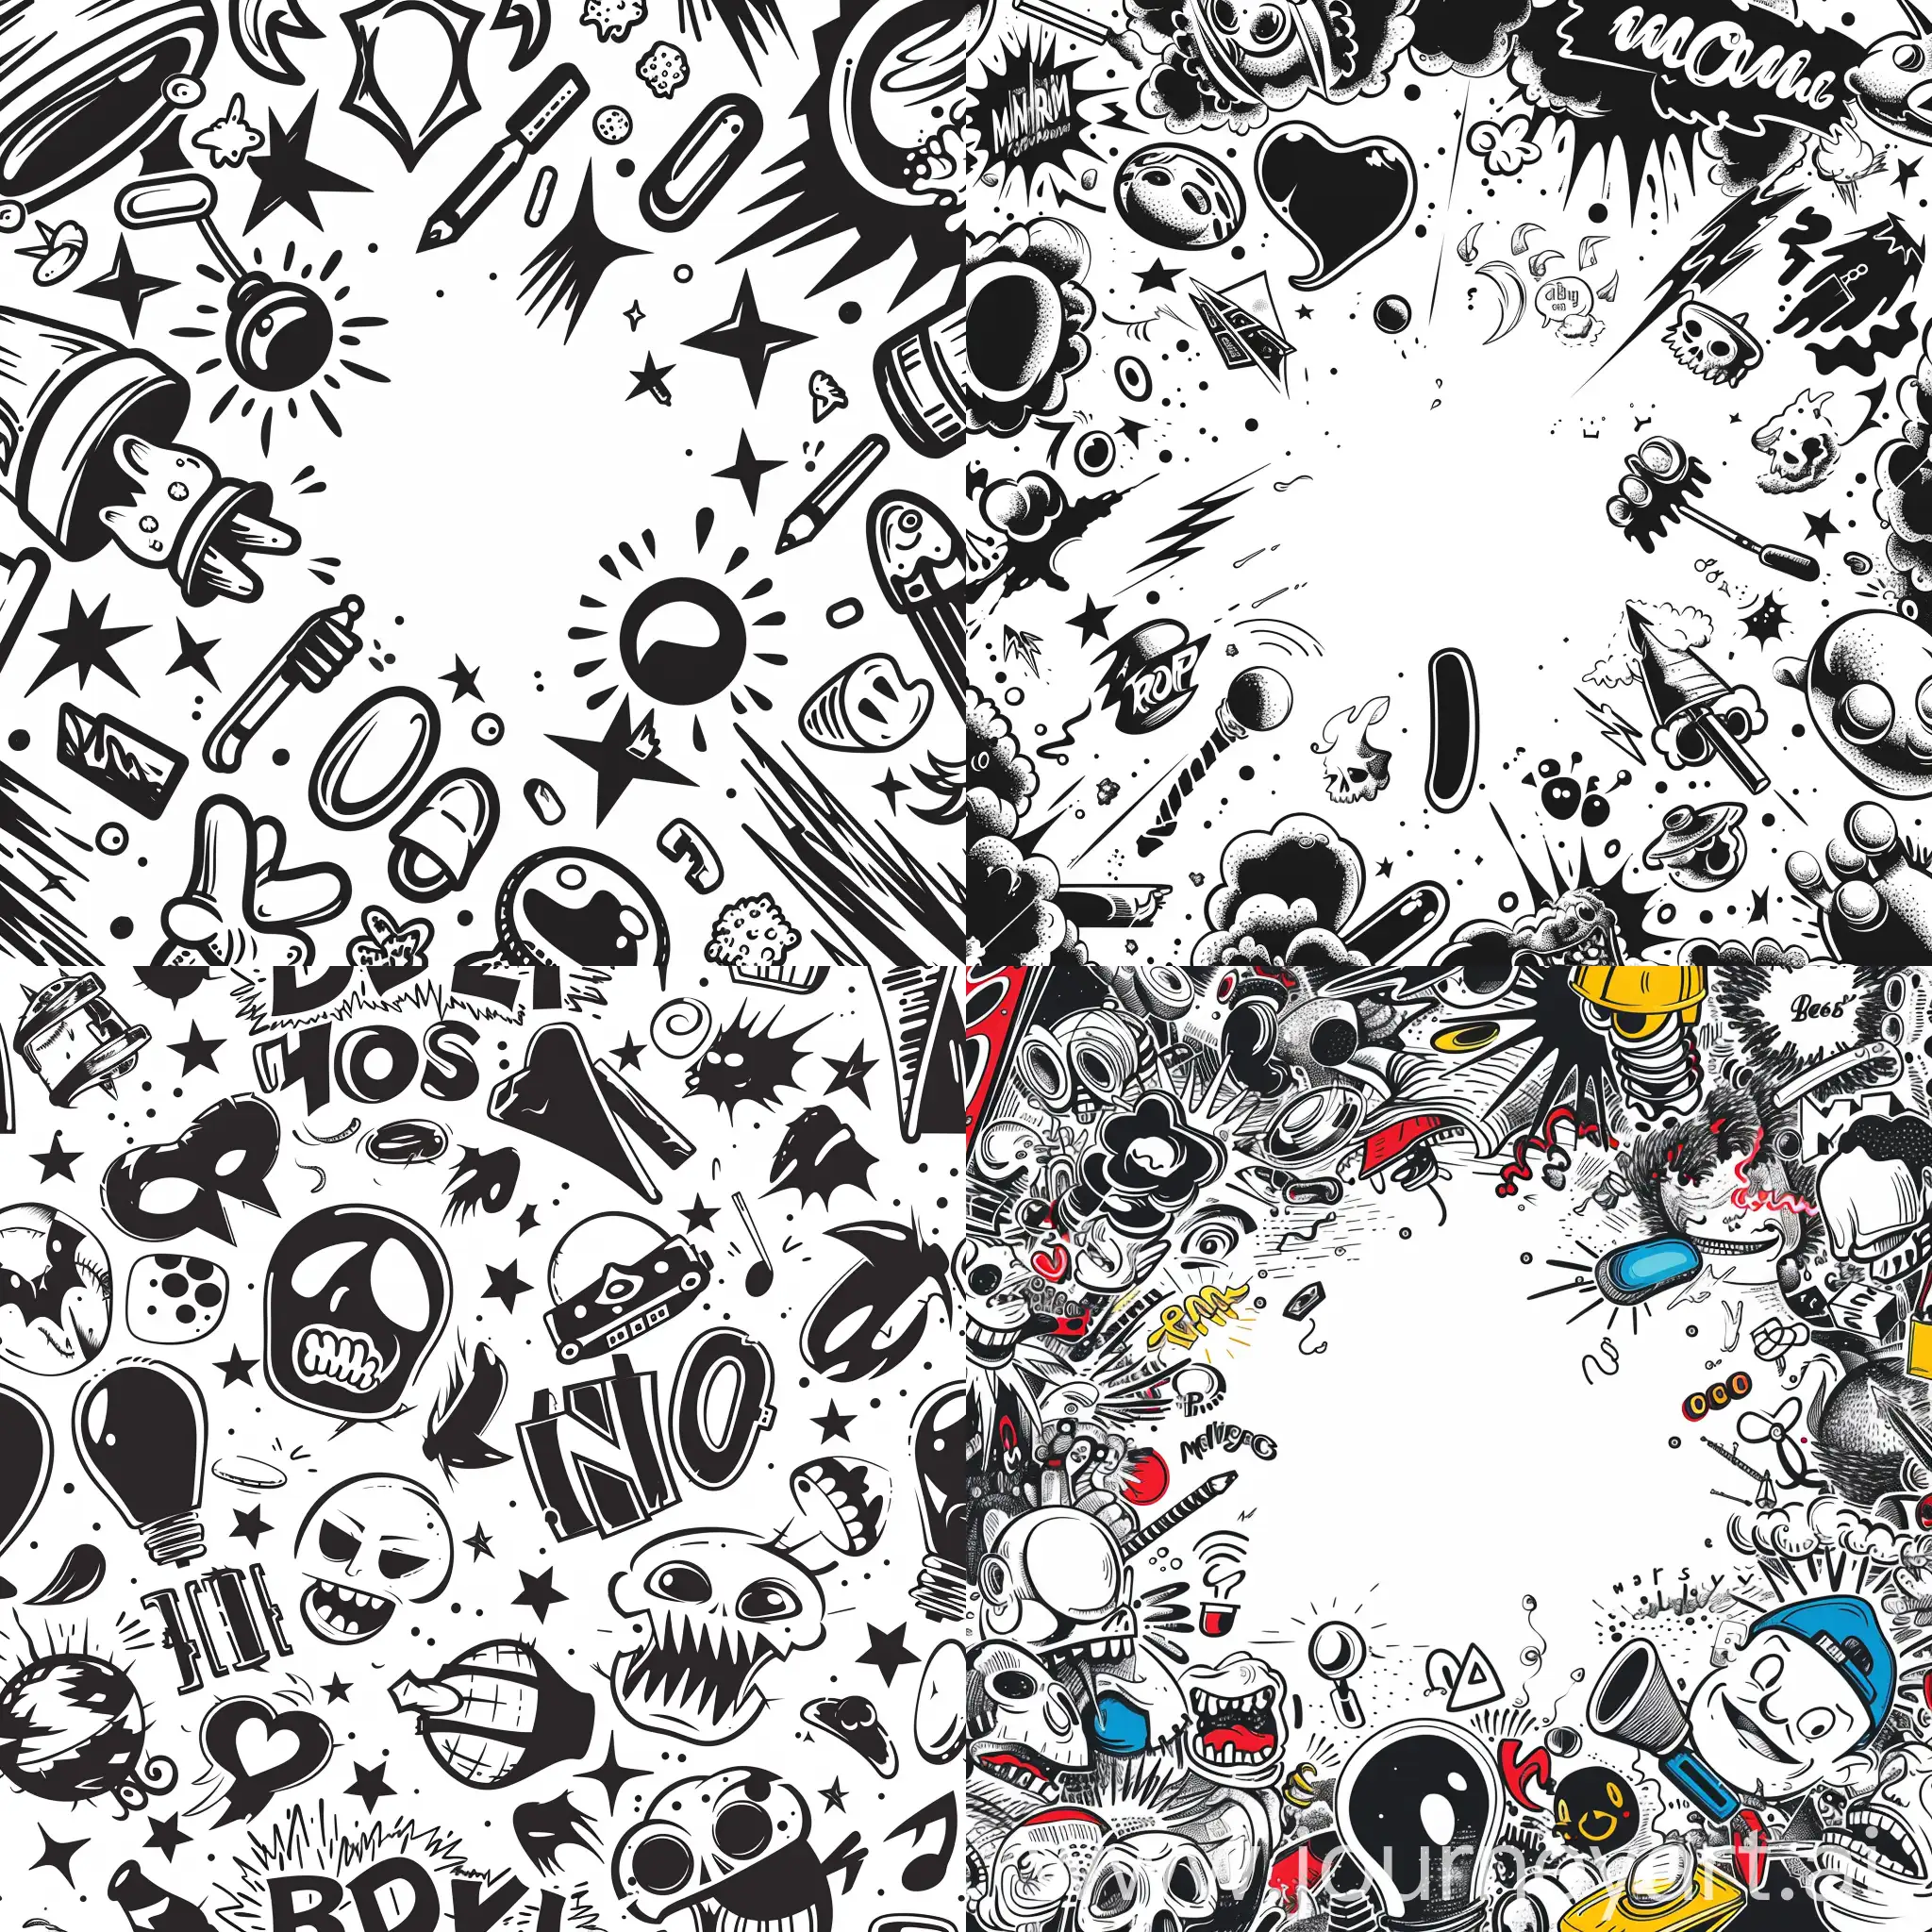 a full white background with many pop elements drawn stylized in black and white colour with space between them, ultra-detailed